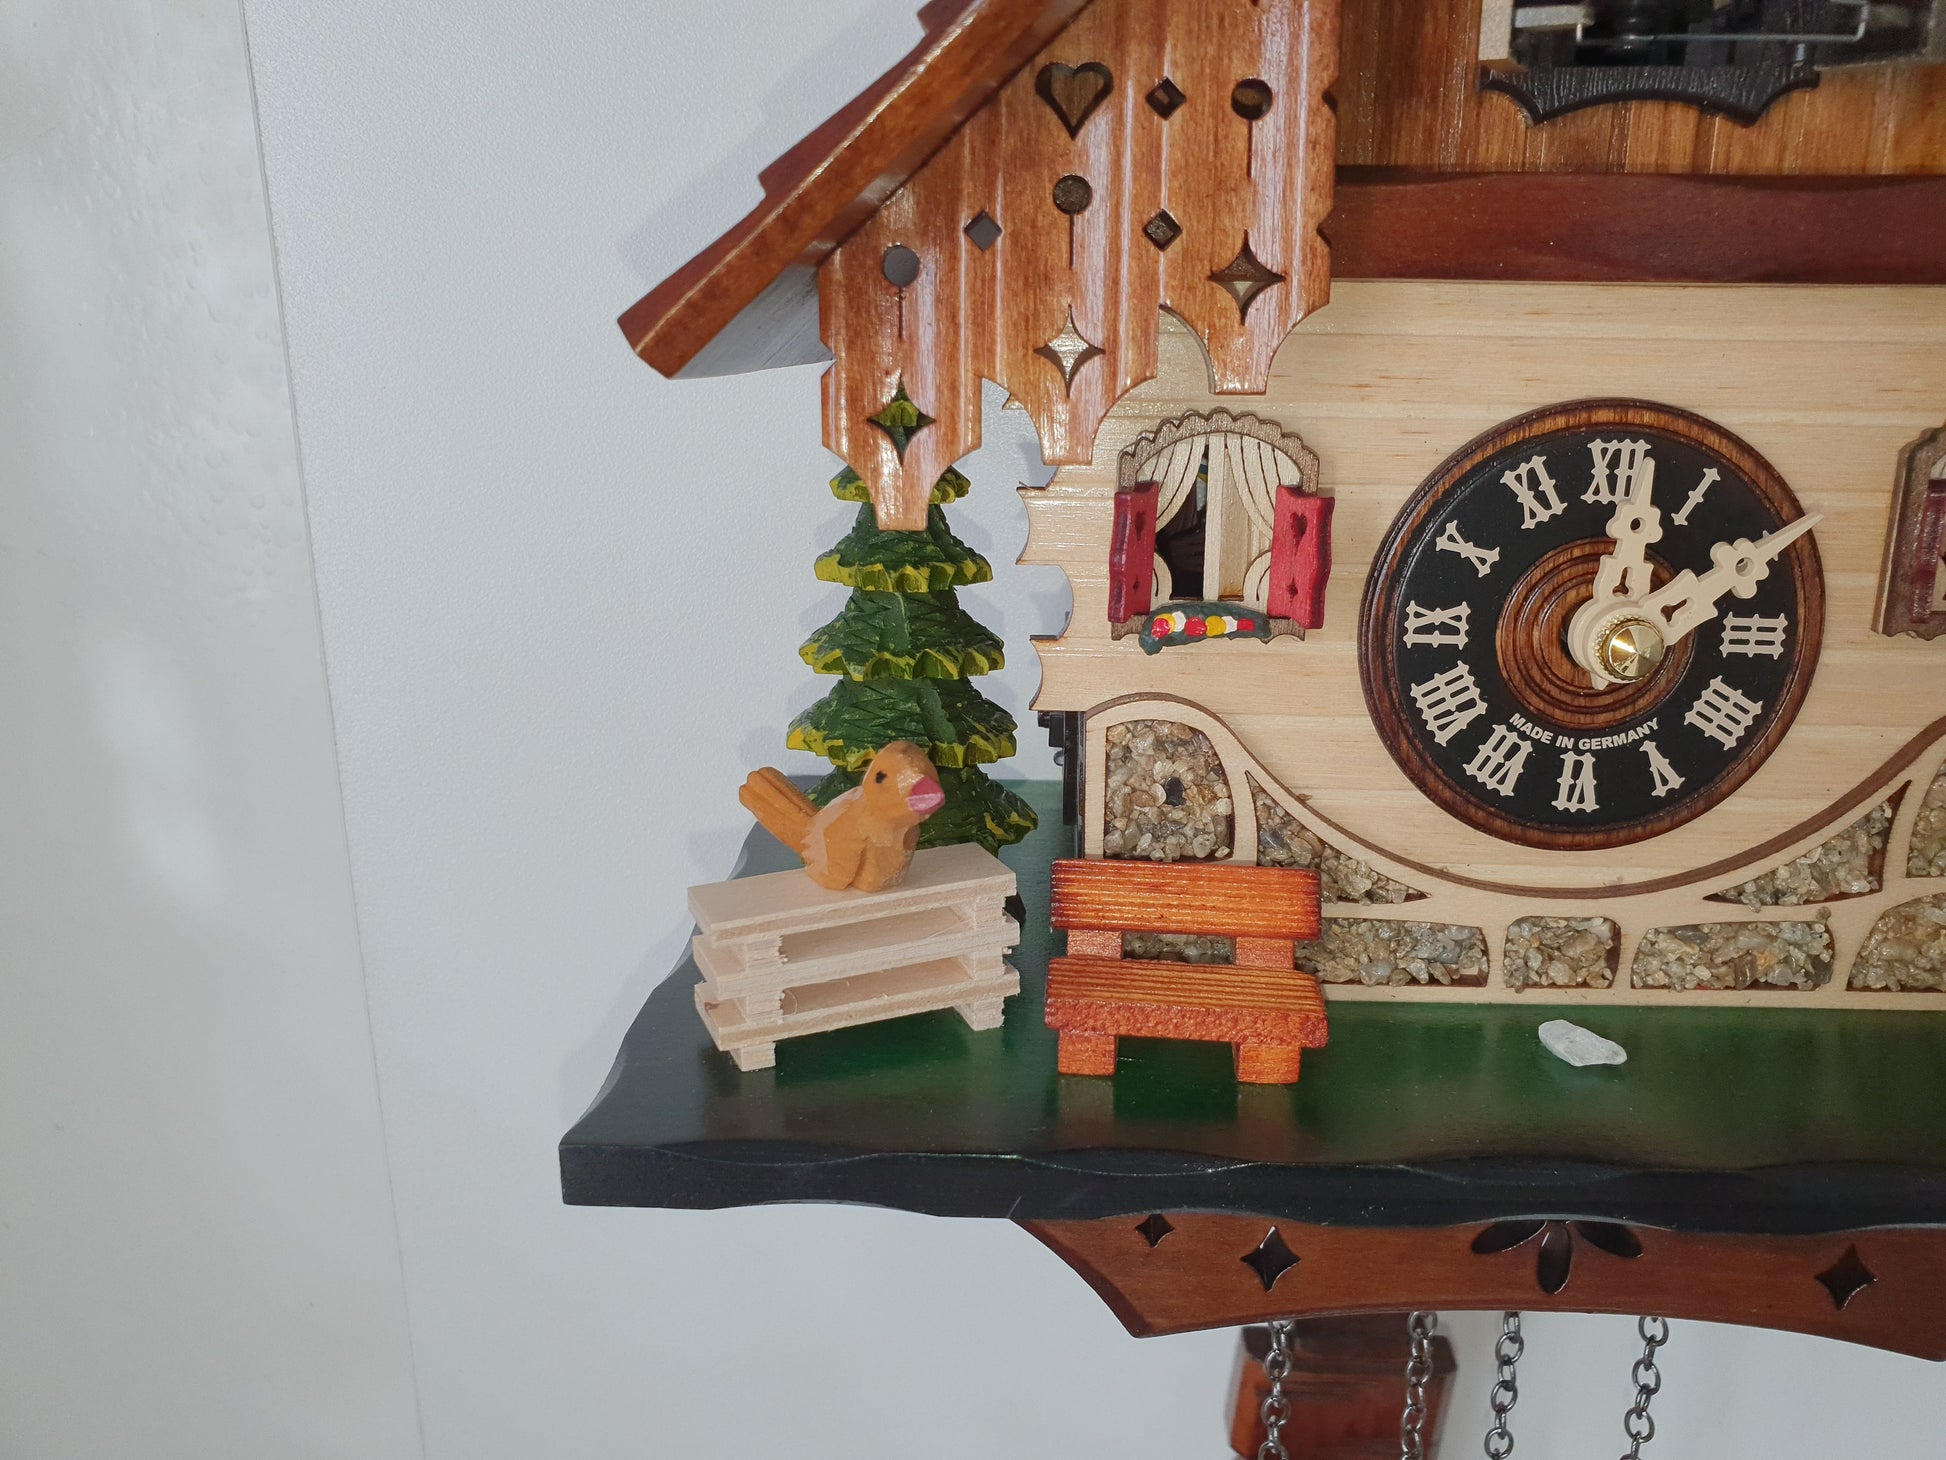 Amazing Chalet Quartz Musical Cuckoo Clock With Dog & Bell Tower. Made In Germany With Free Delivery Across Australia. Cuckoo Clock [clocktyme.com] 